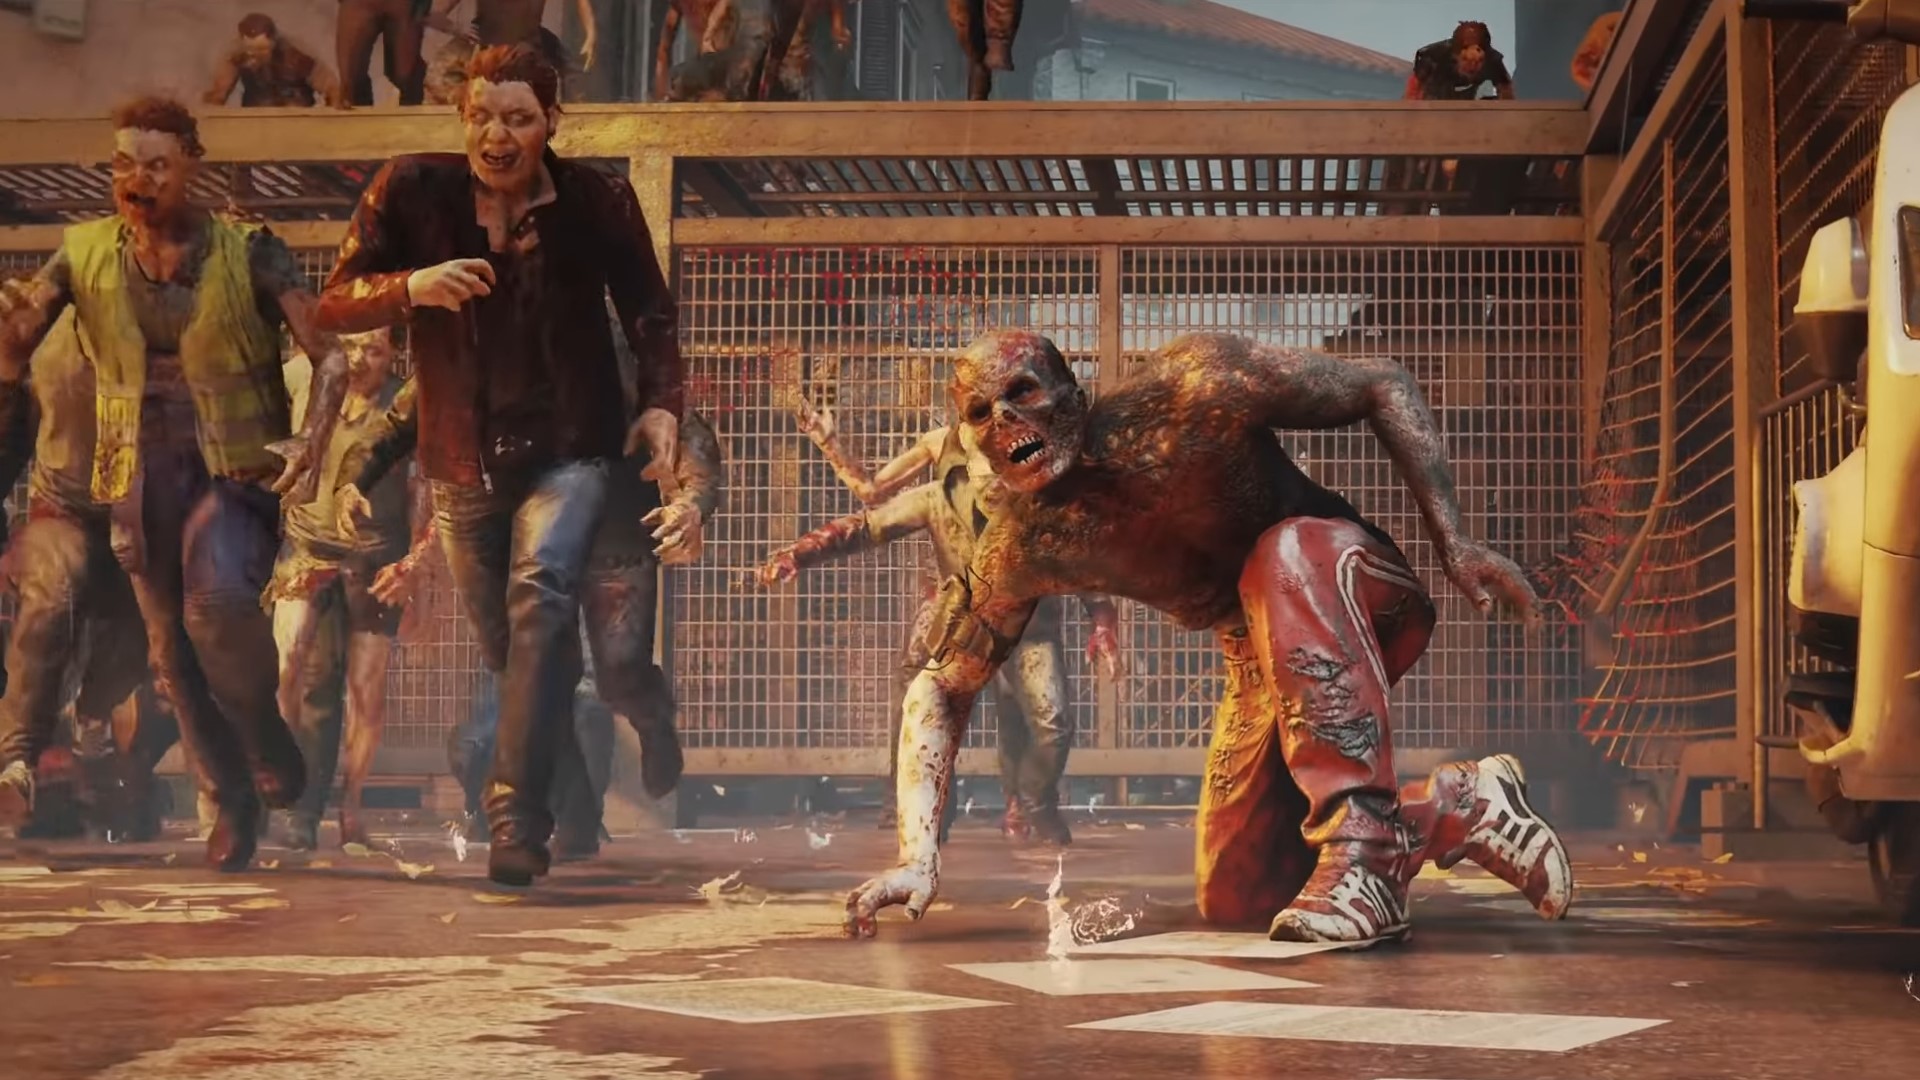 World War Z Aftermath is due out this year, and adds a new melee system